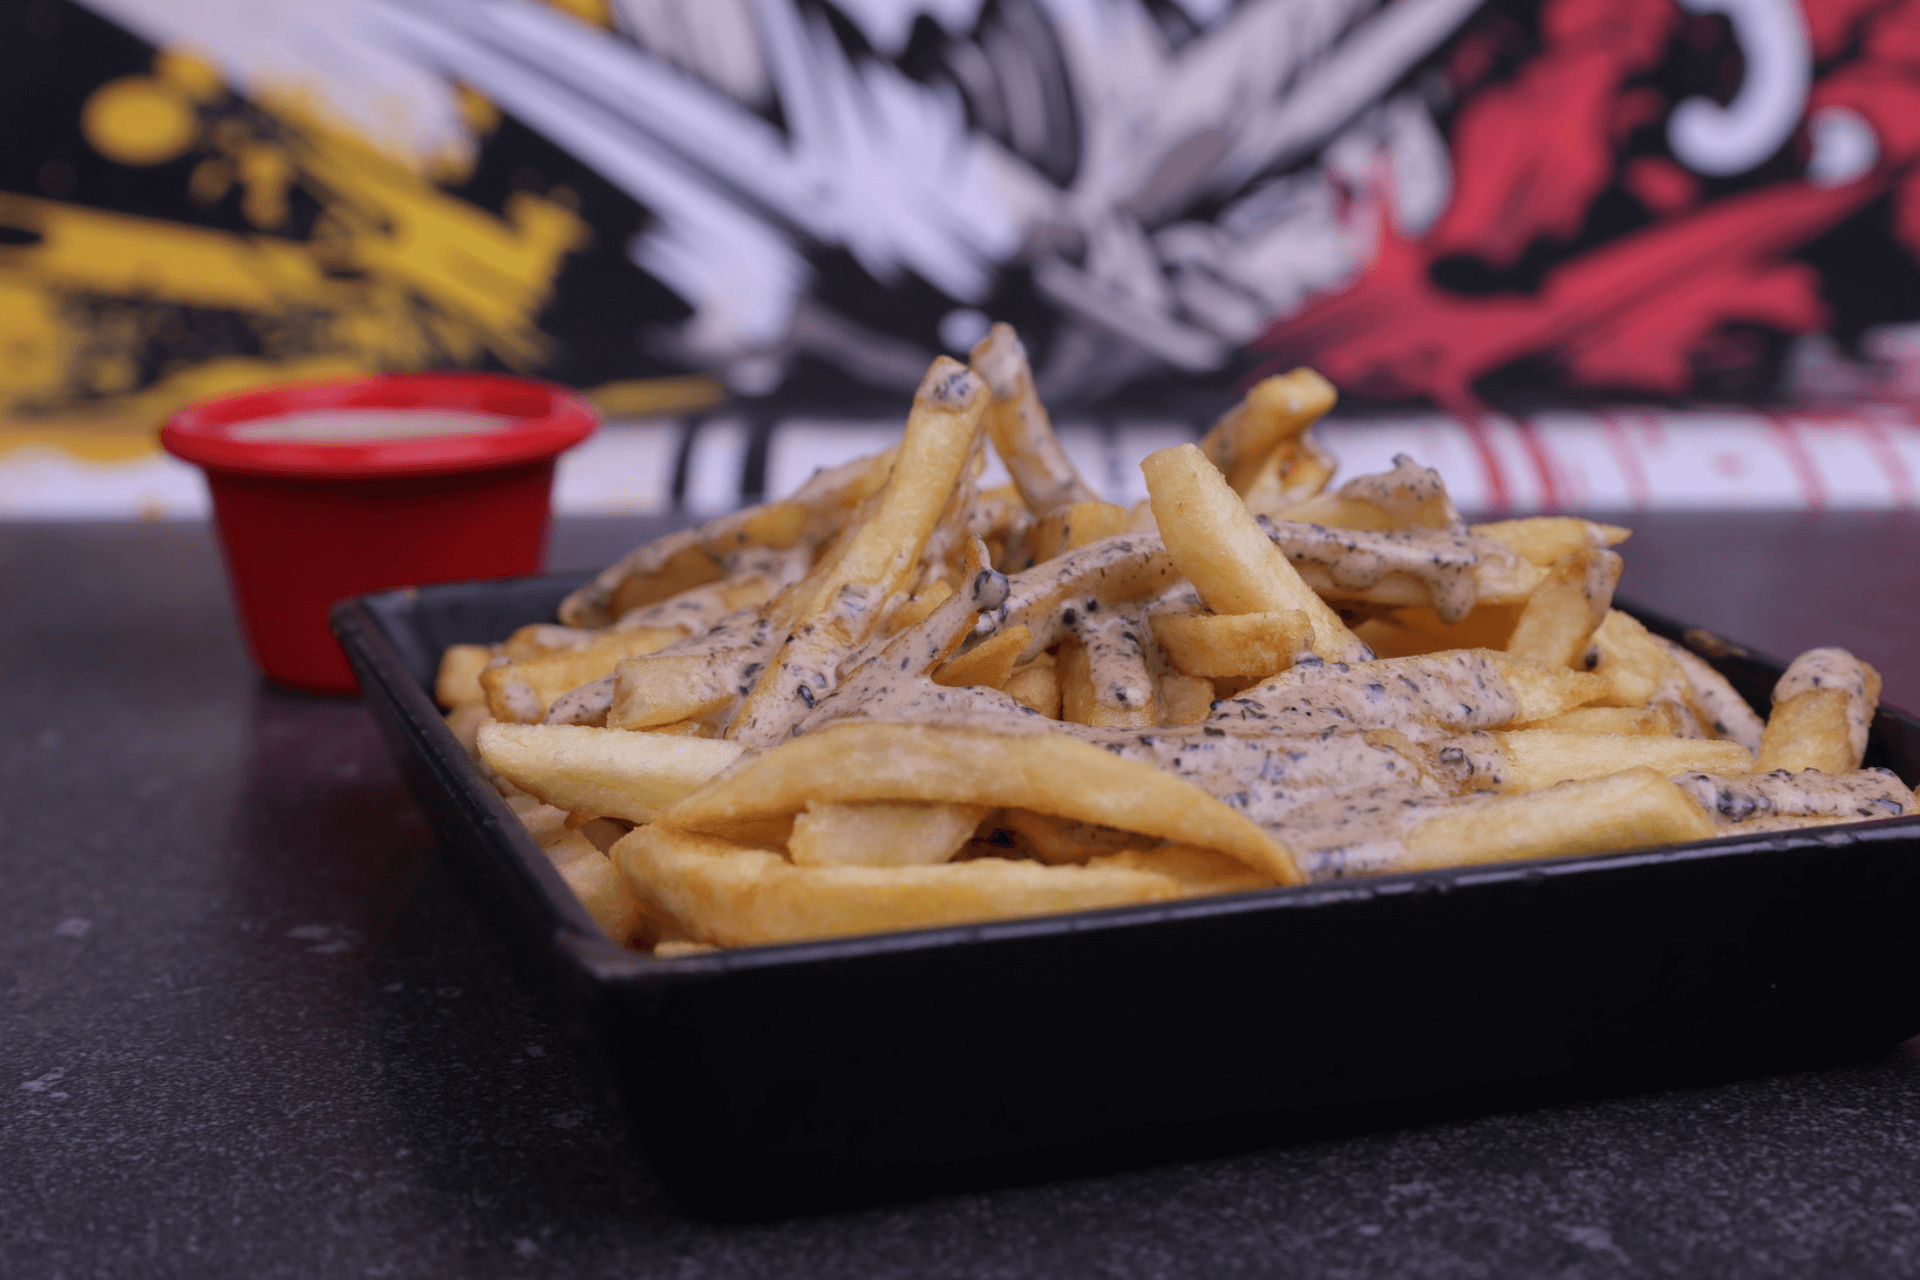 mouthwatering-fries-at-beirut-hotel-restaurant